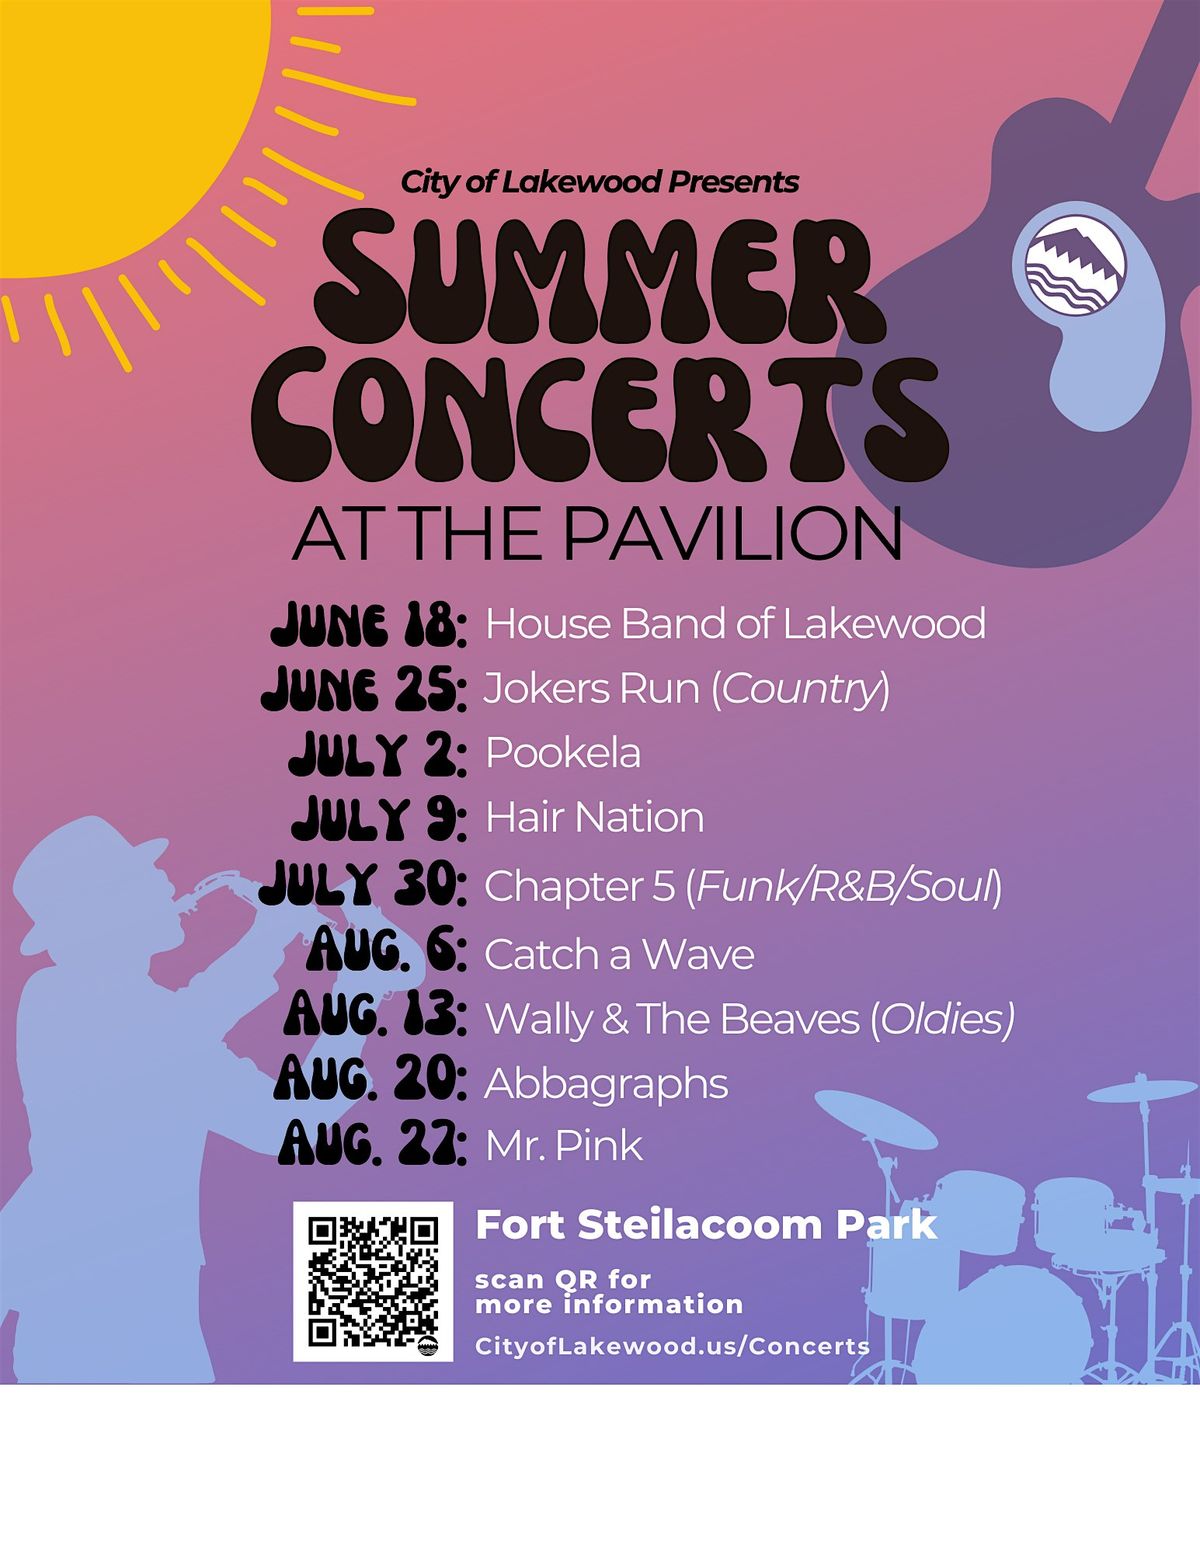 SUMMER CONCERTS  AT THE PAVILION - CITY OF LAKEWOOD